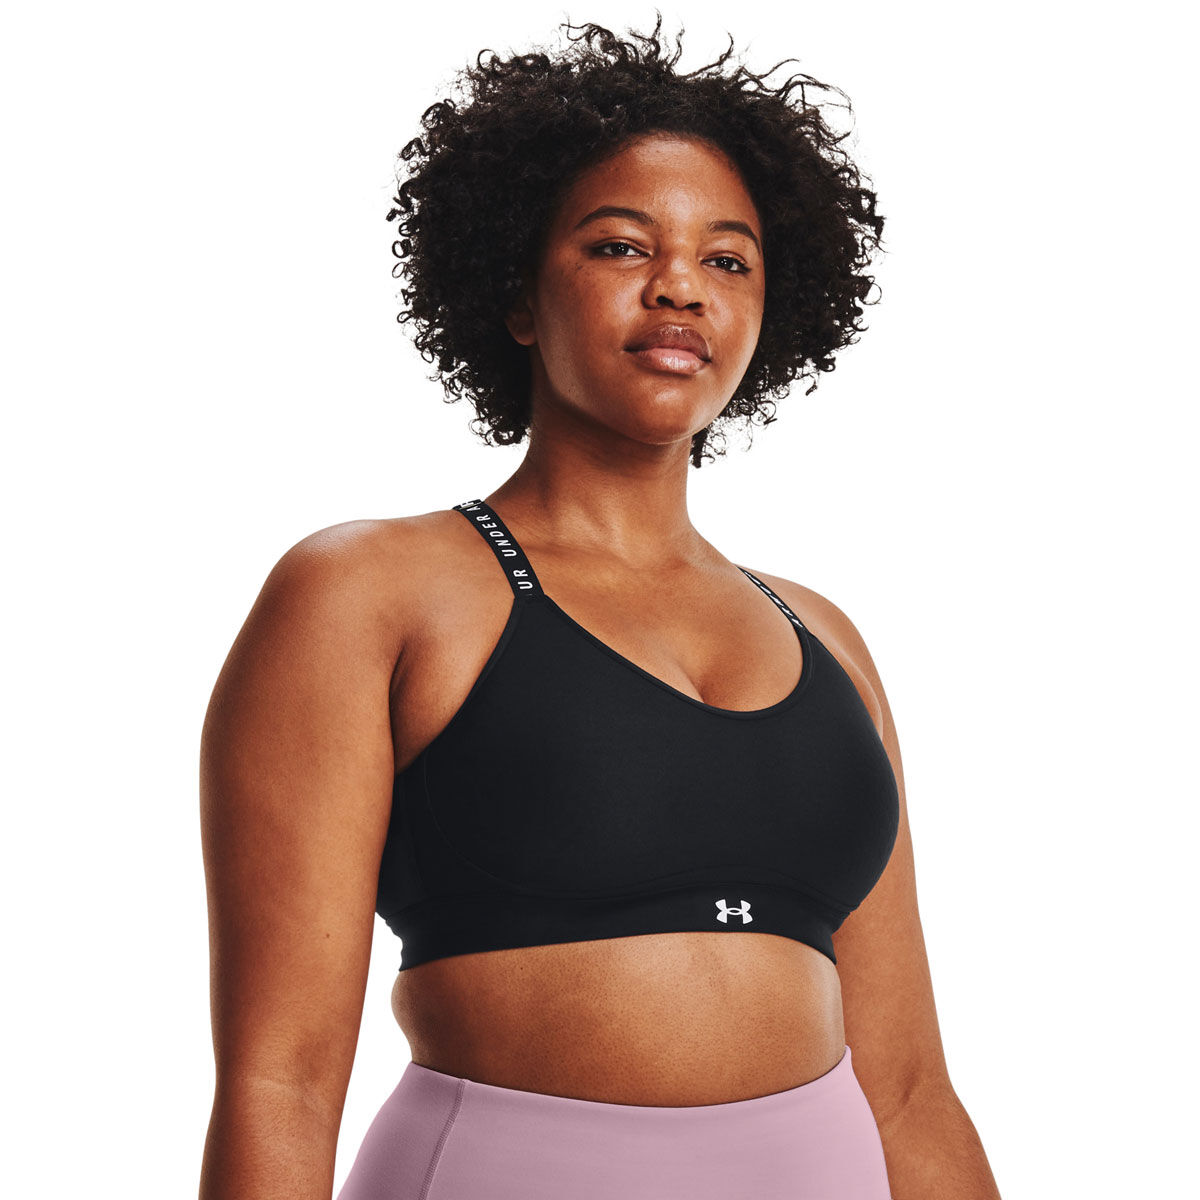 Under Armour Infinity Covered Low support sports bra in black